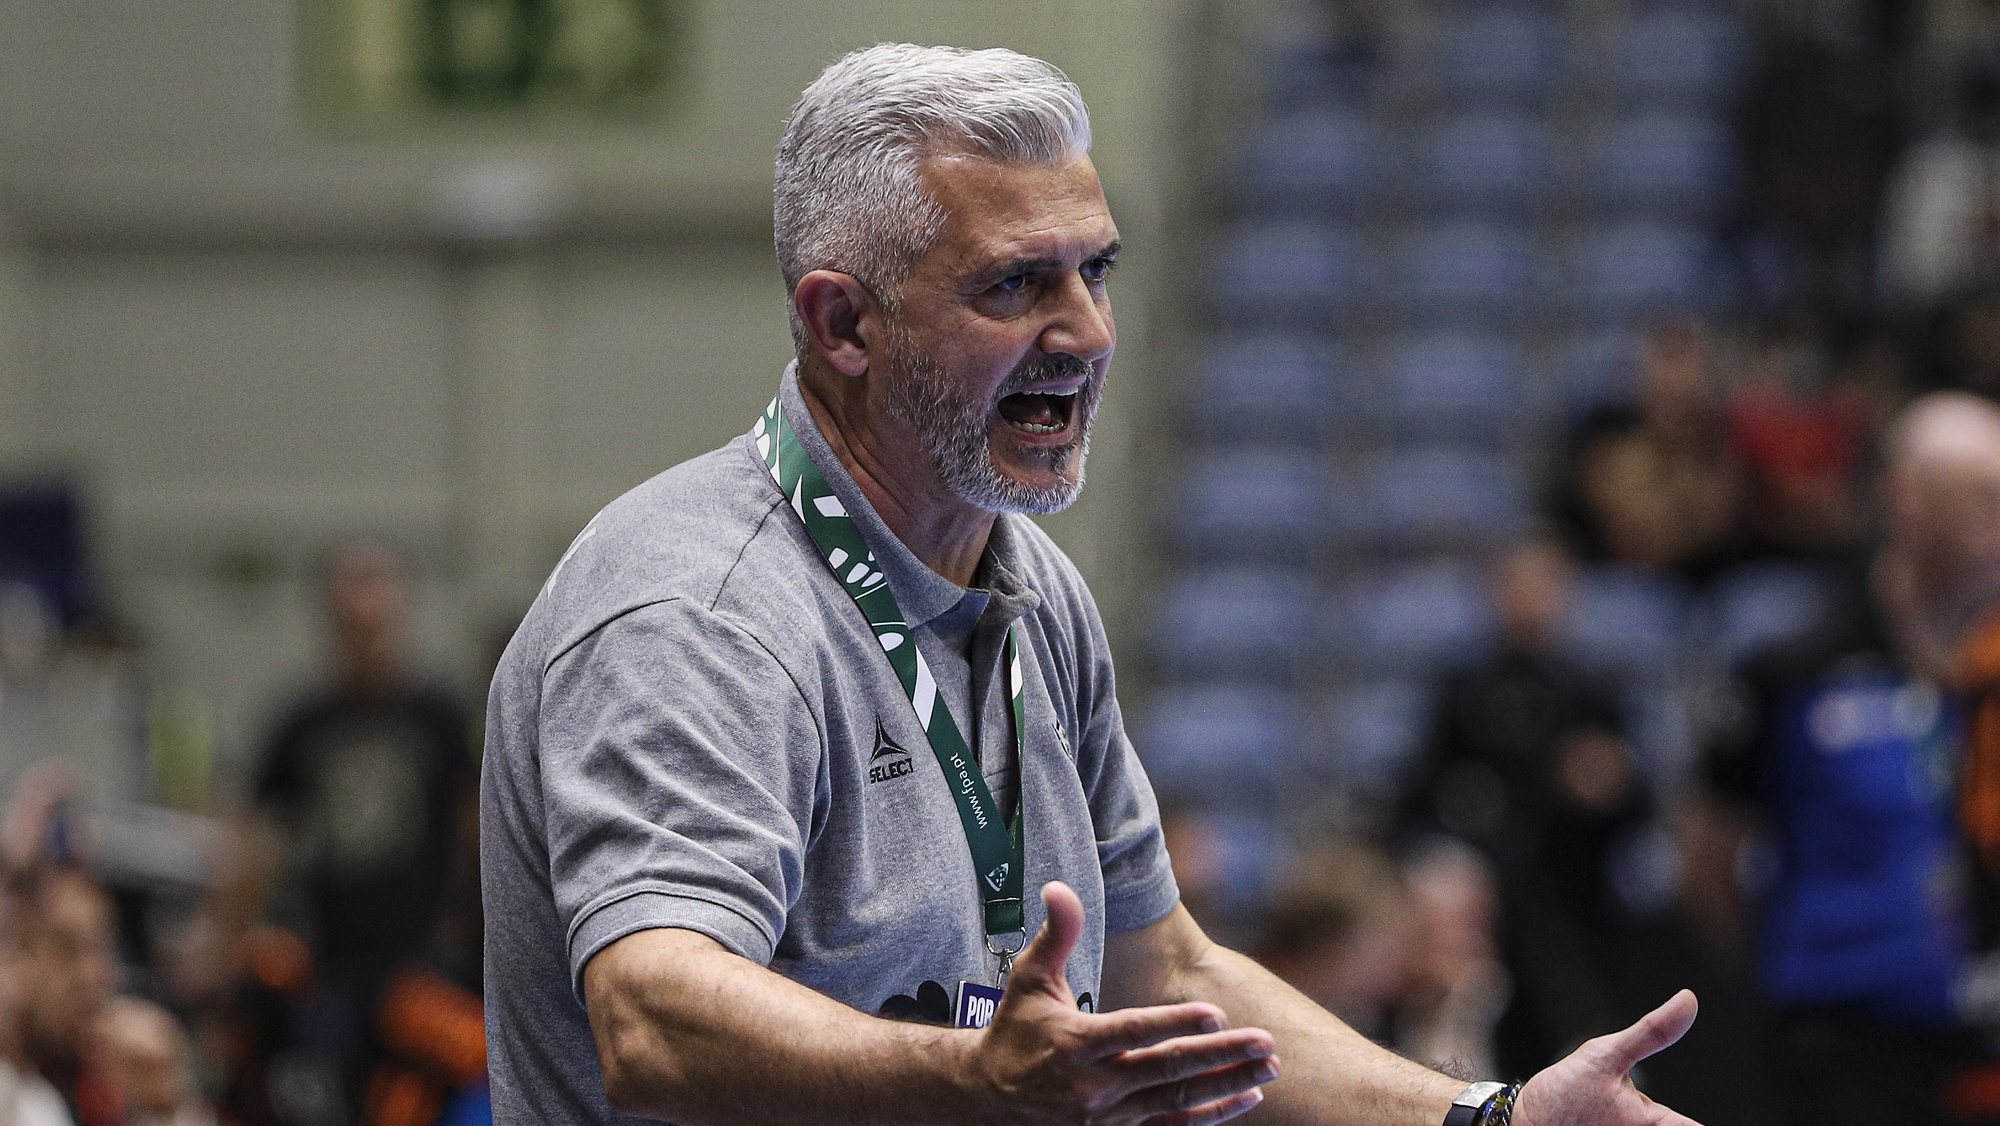 Portugal coach Paulo Pereira reacts during the 2023 World Men&#039;s Handball Championship qualification match against Netherlands, held in Portimao, southern of Portugal, 14 April 2022. LUIS FORRA/LUSA